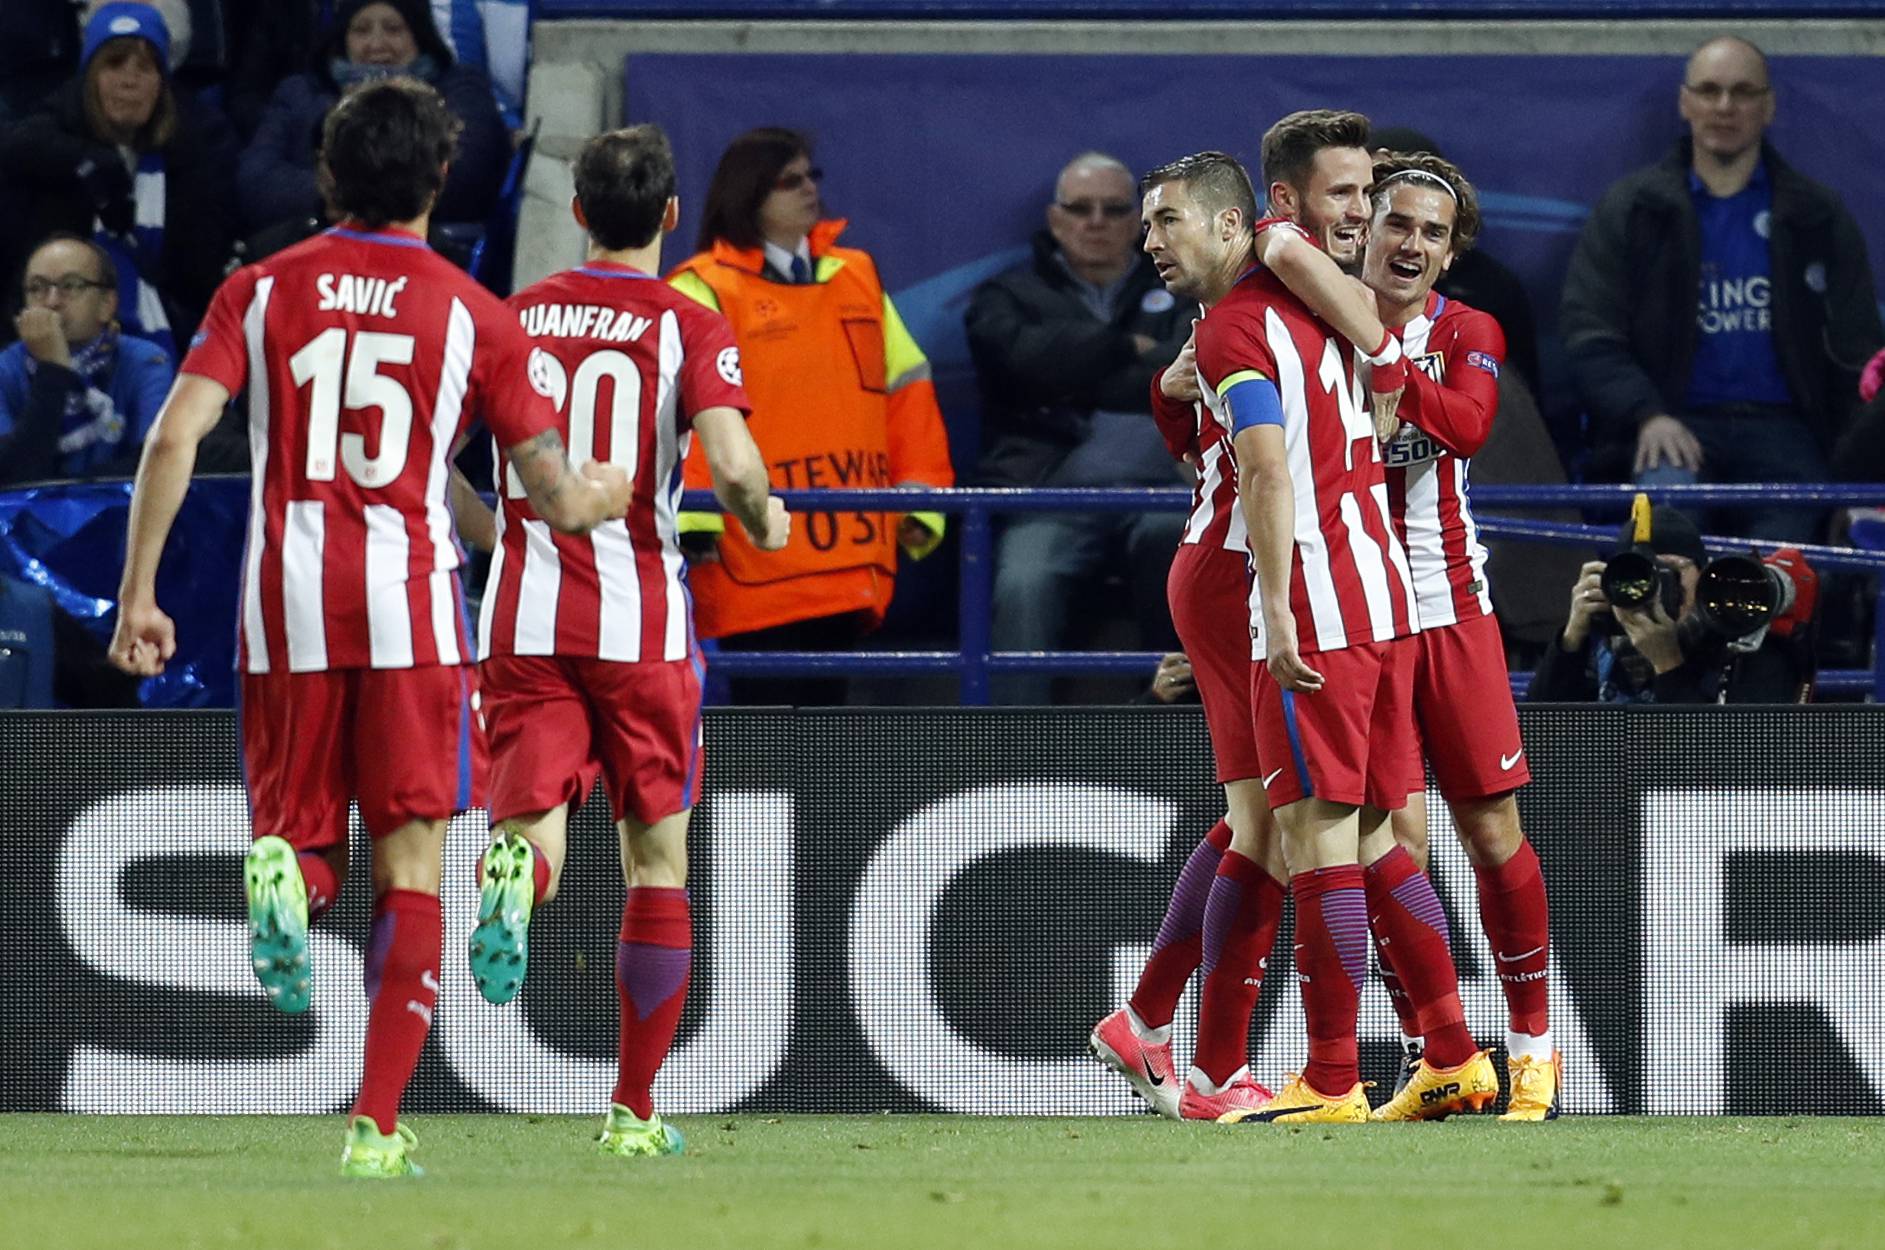 Atletico Madrid's Saul Niguez celebrates scoring their first goal with team mates